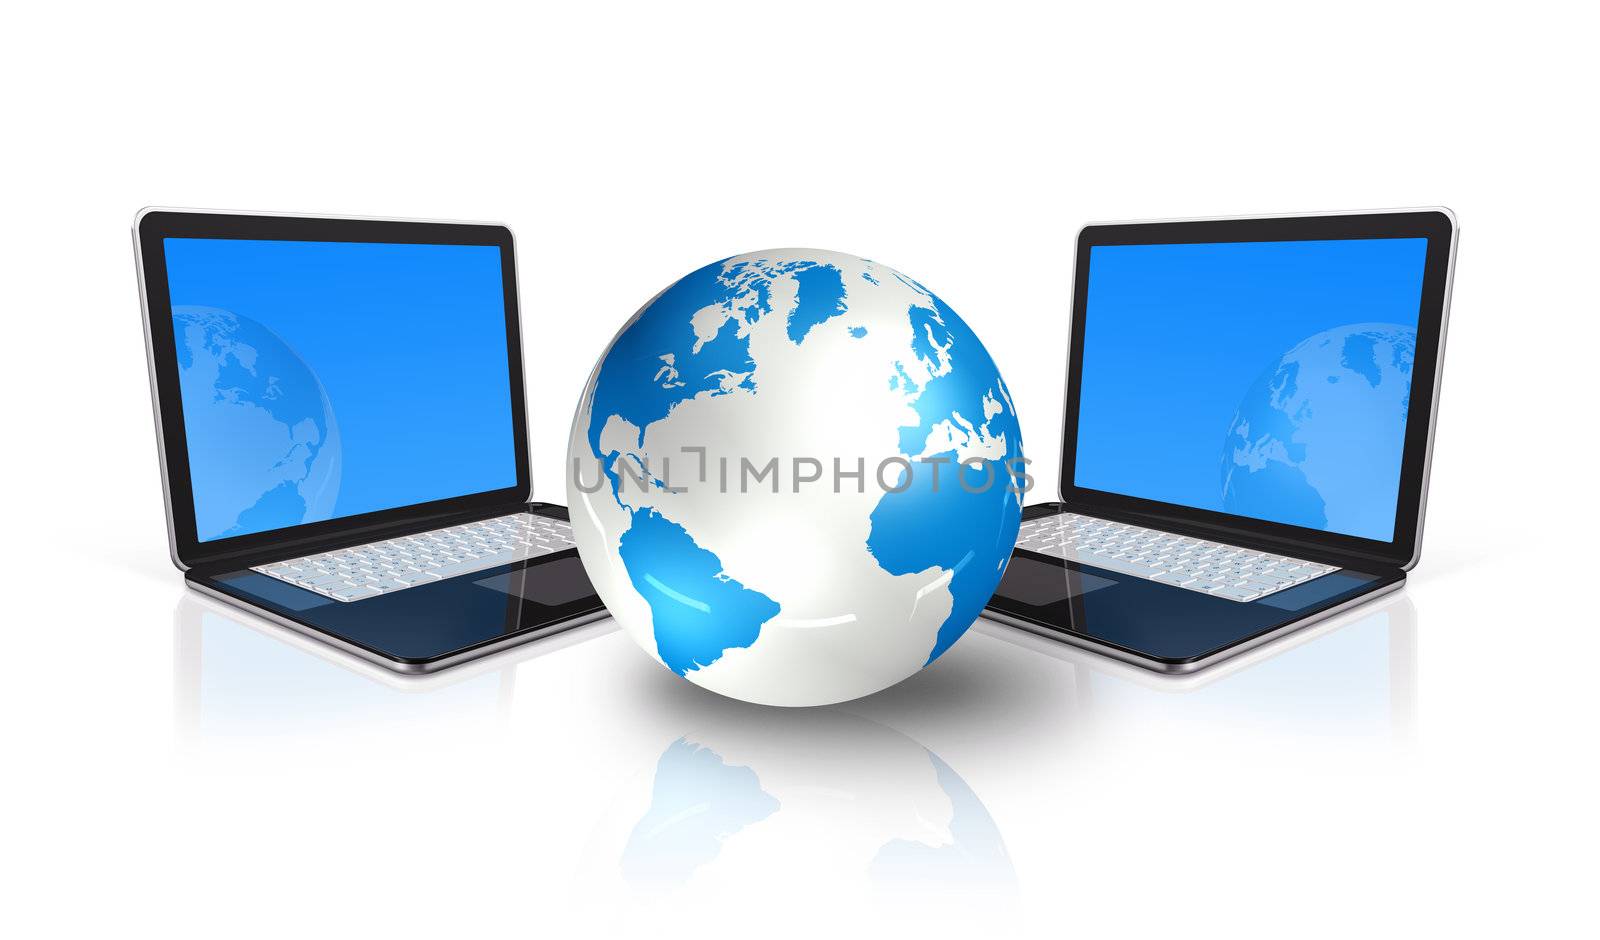 two 3D laptop computers around a world globe isolated on white